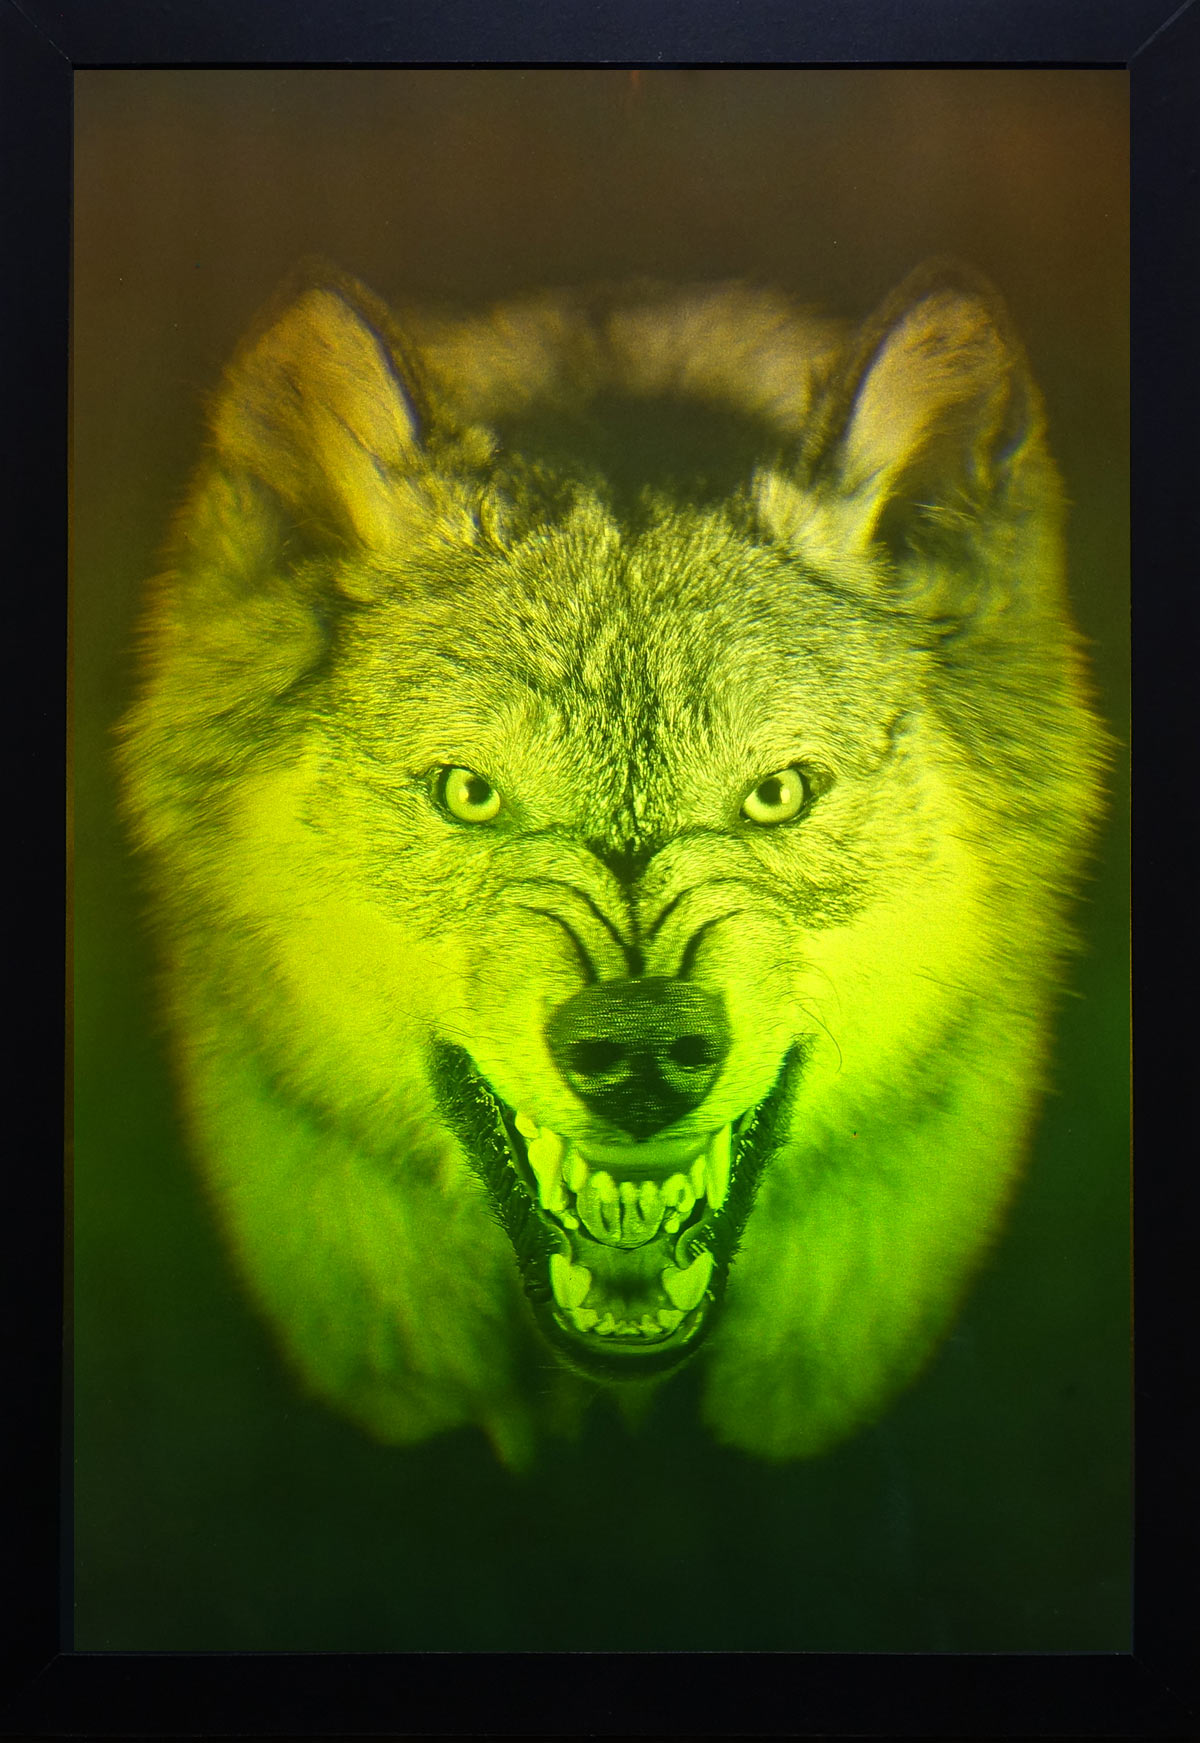 Hologram of a wolf